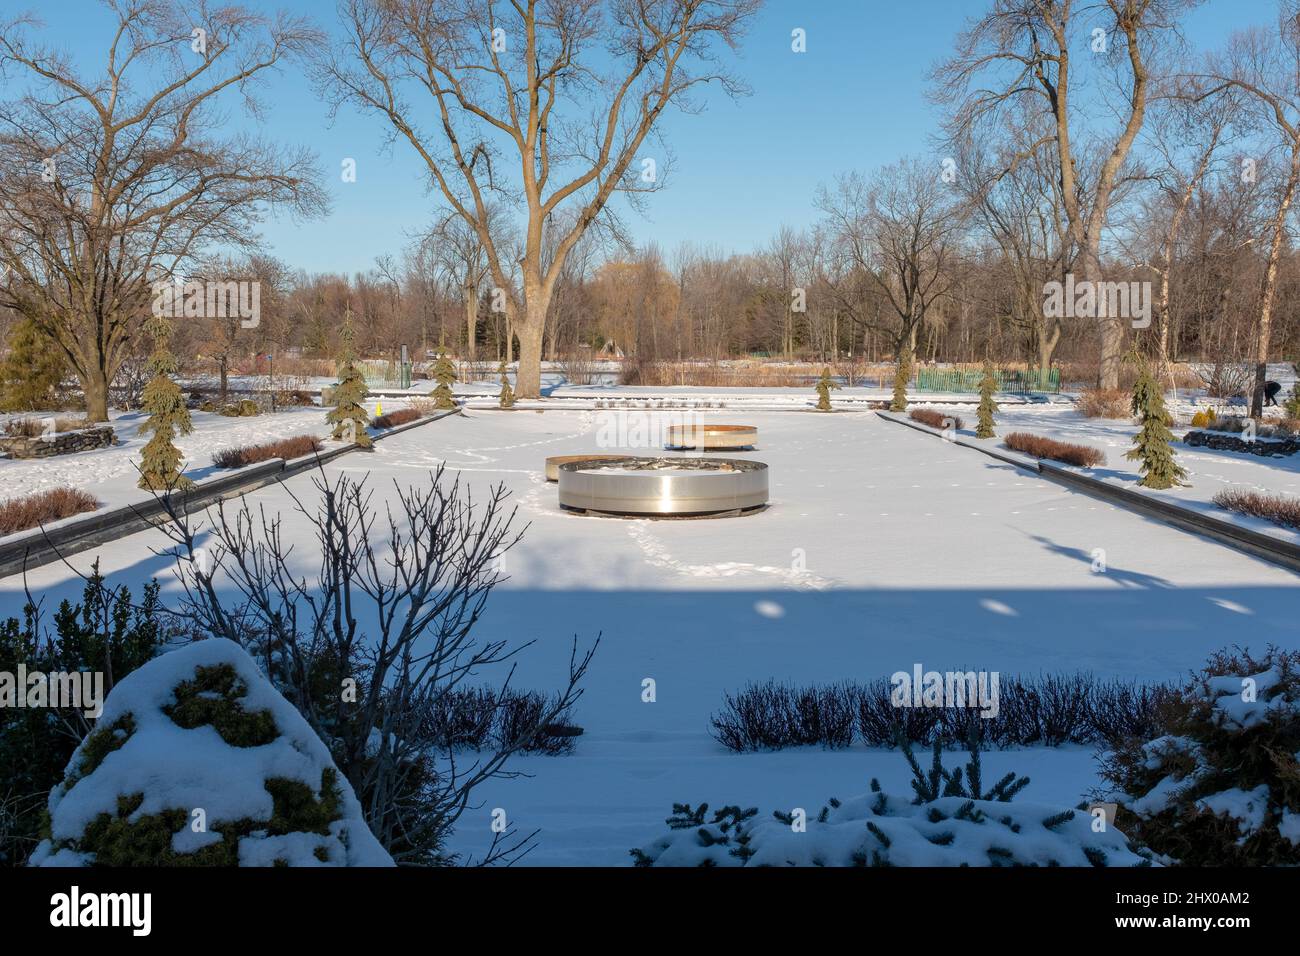 A frozen fountain at the Montreal's botanical garden, taken on a sunny winter day Stock Photo